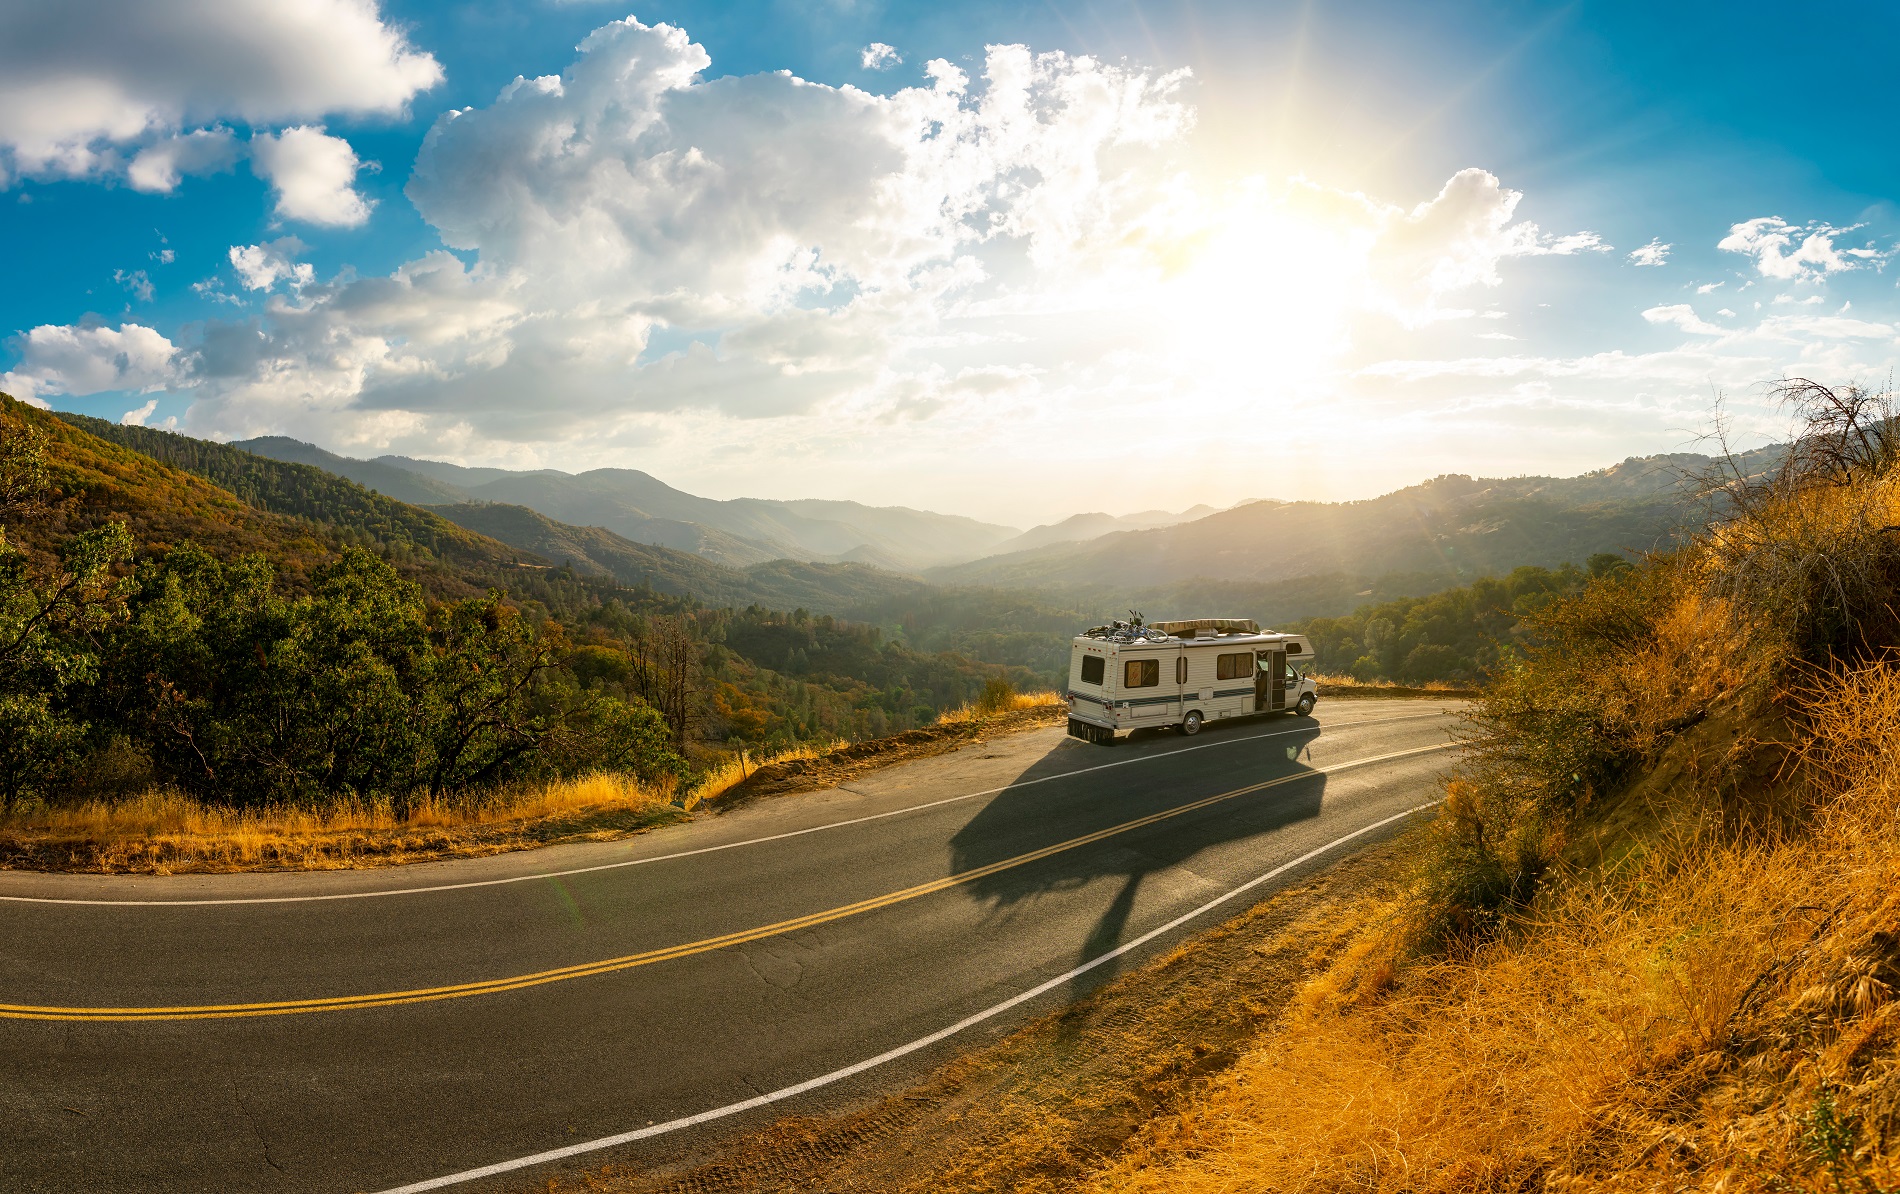 How Much You Should Realistically Budget for a Road Trip?